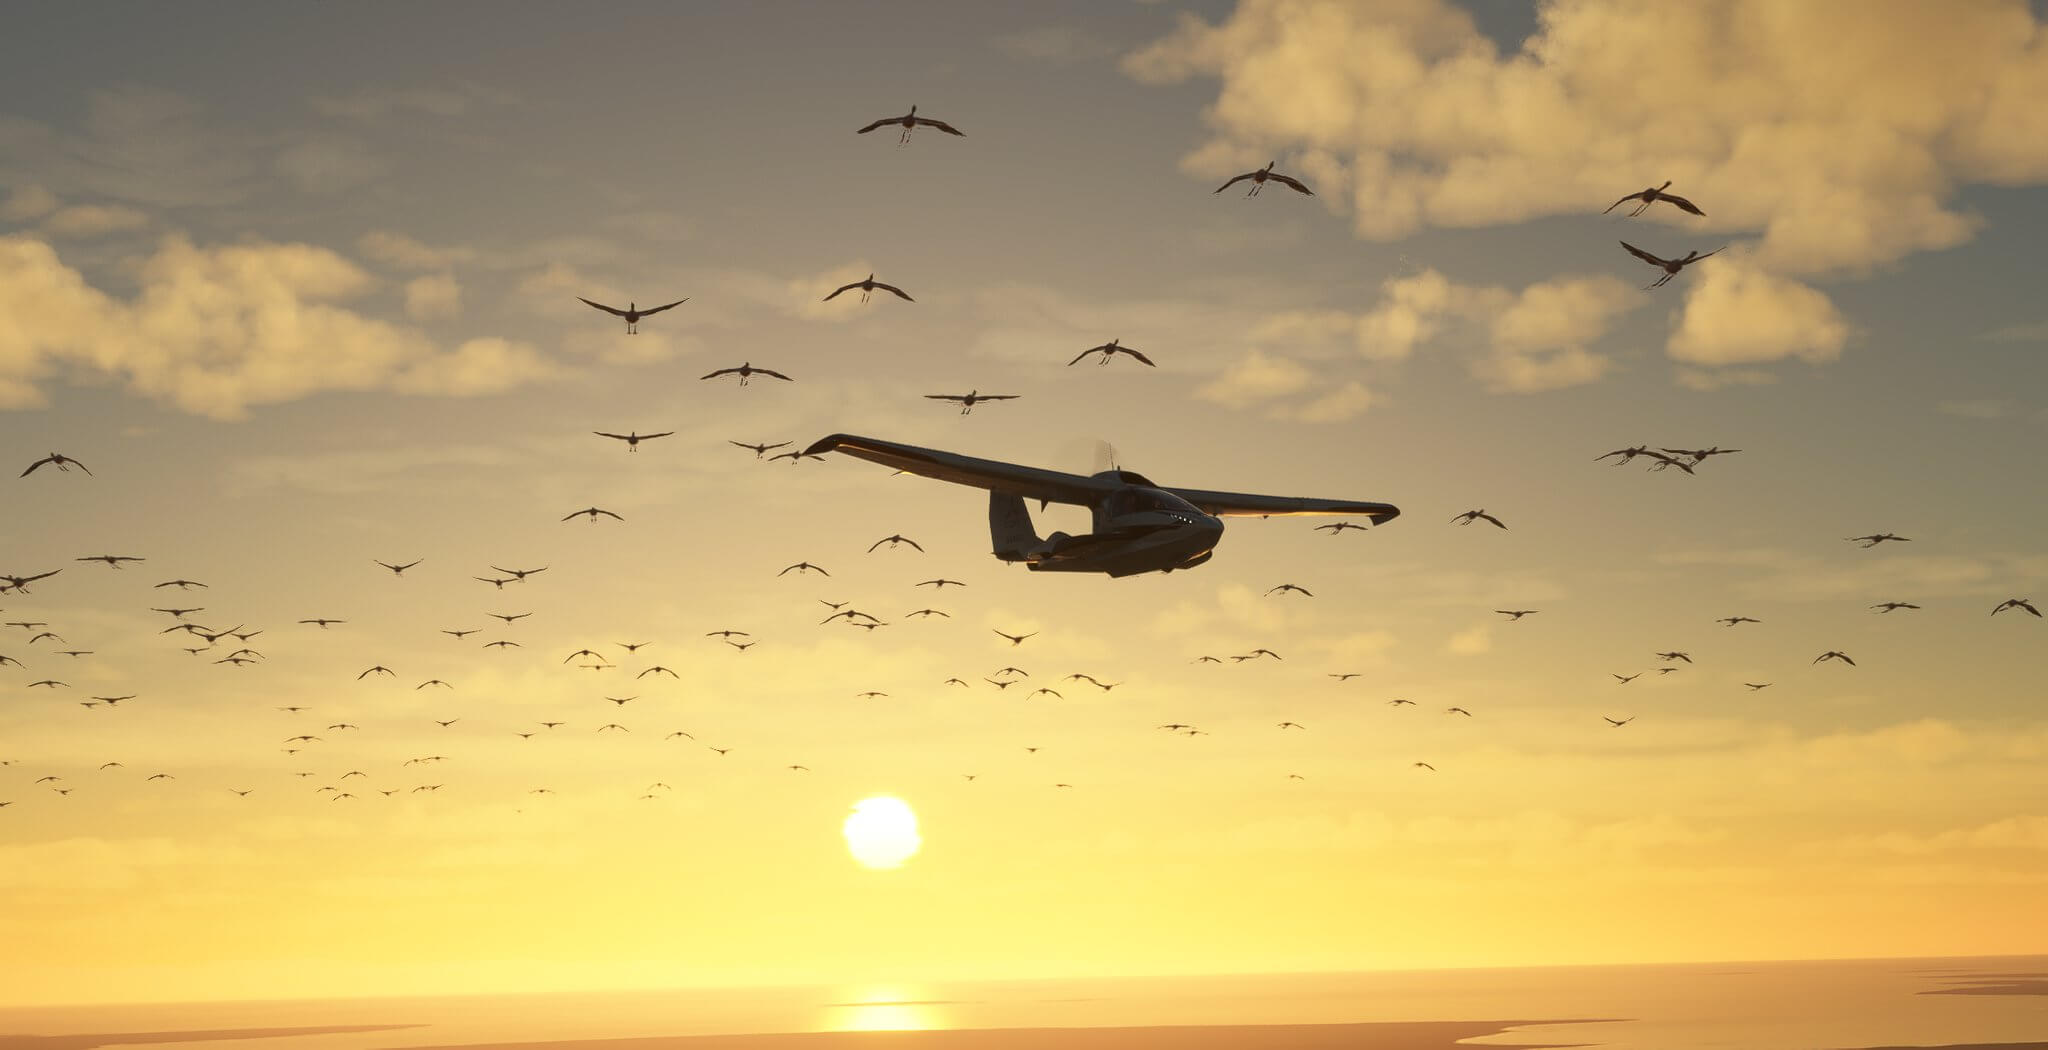 The Icon A5 flies with sunrise behind and a flock of birds in close formation.